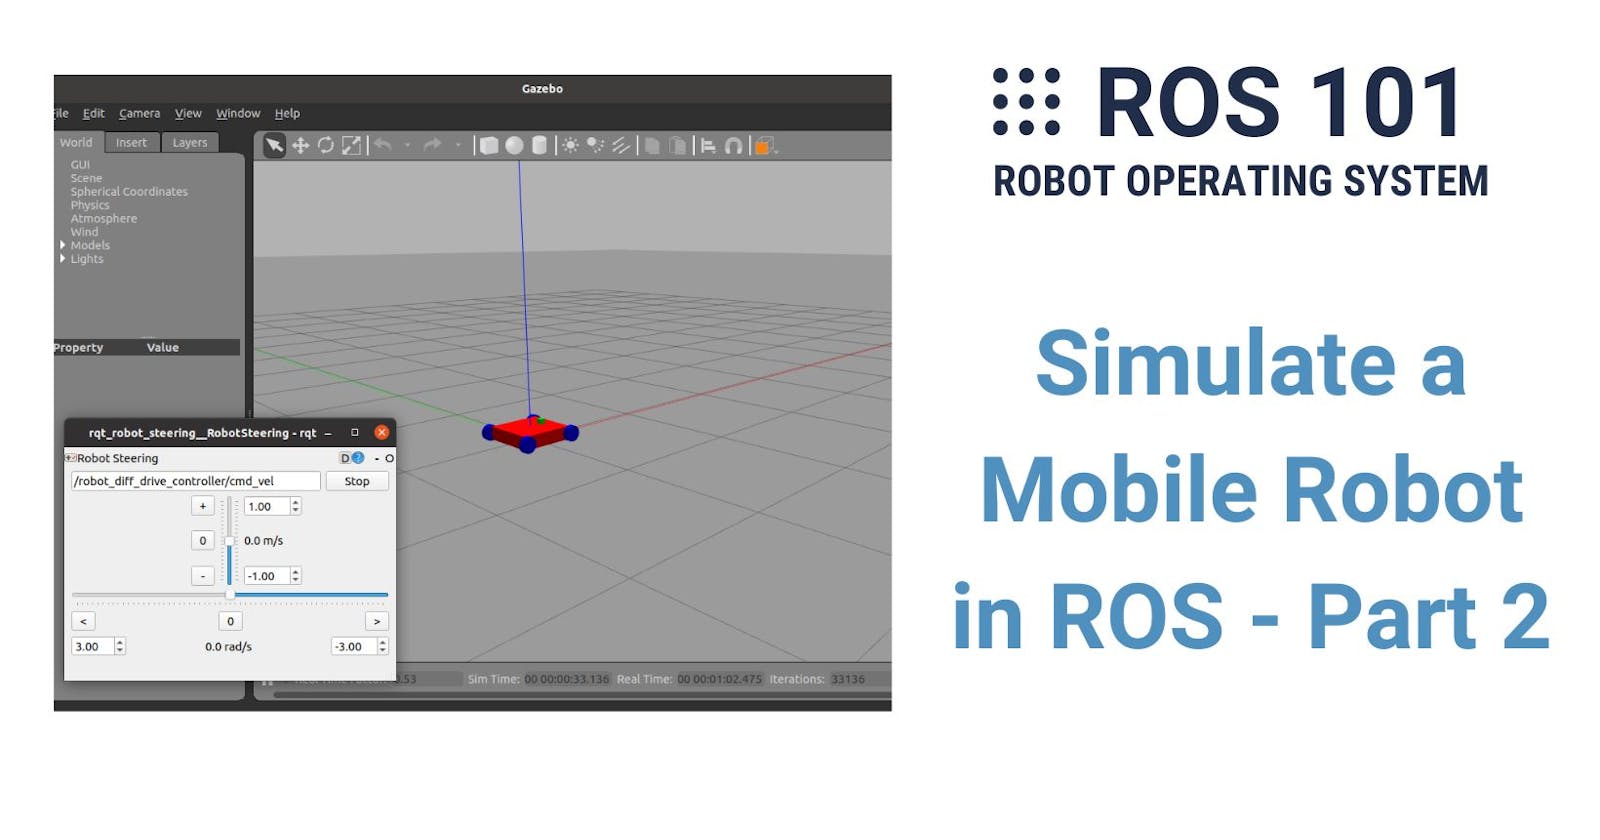 11. Simulate a Mobile Robot in ROS - Part 2